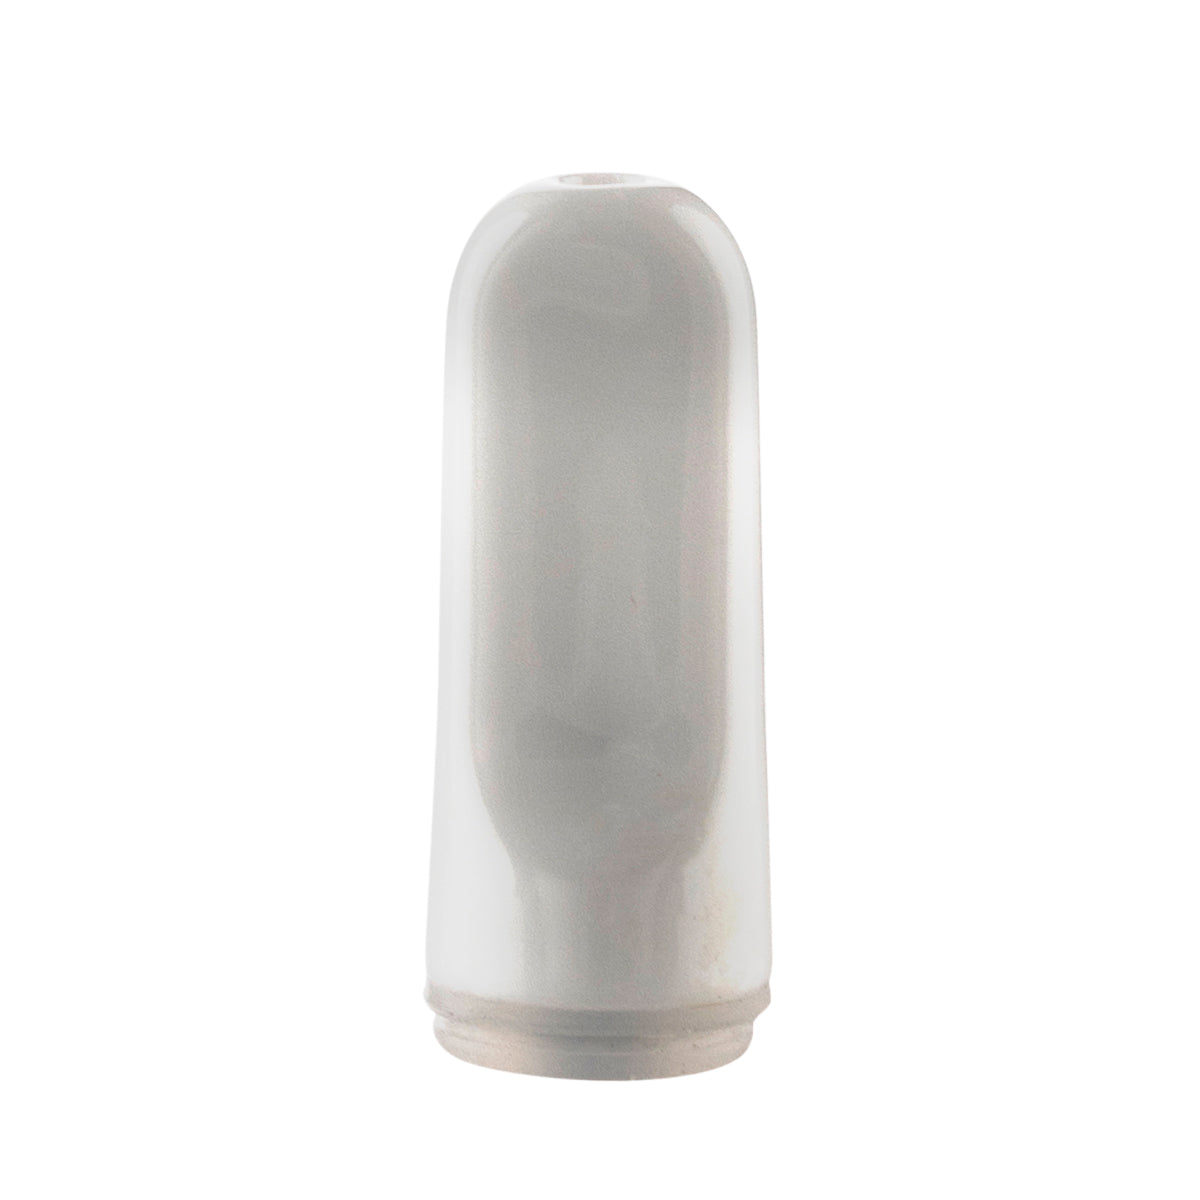 Mouth Tip| Tapered Mouth Tip for Vapes | Ceramic - Various Colors - 100 Count Mouth Tips Biohazard Inc White  